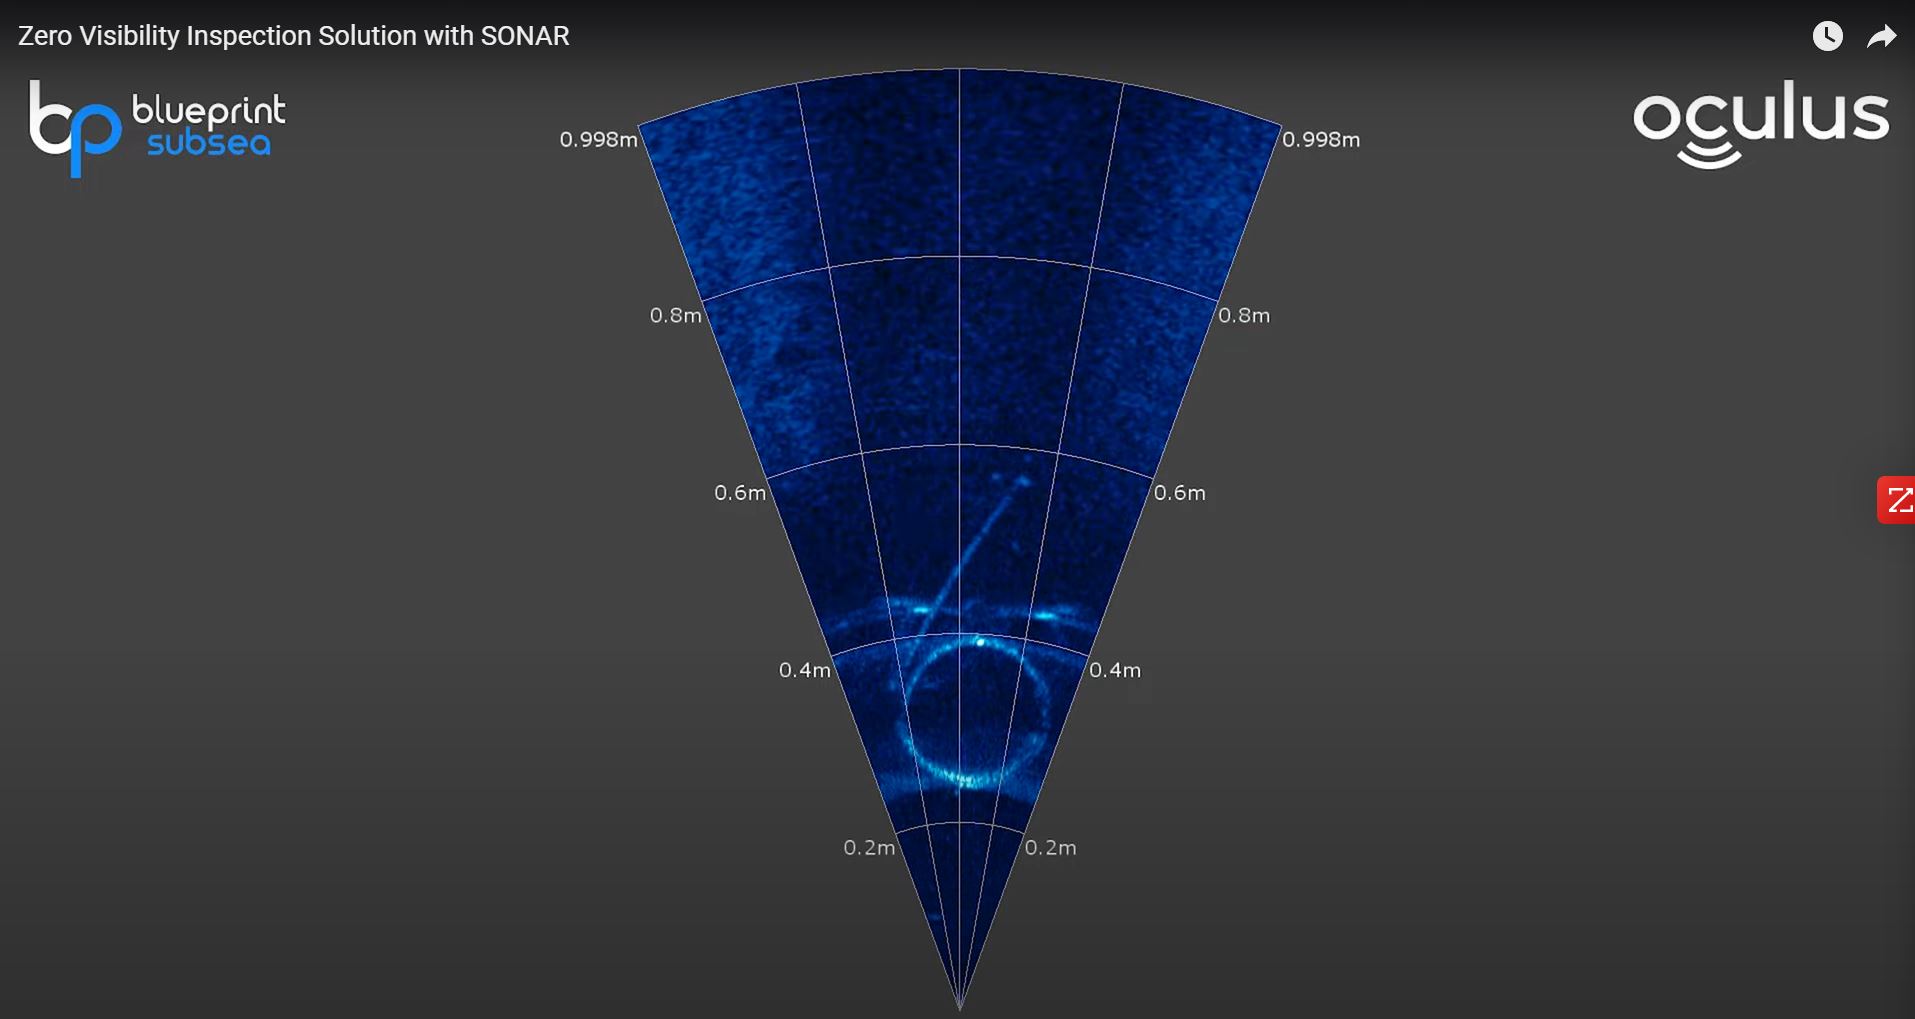 SS4 imaging sonar captures lateral protruding